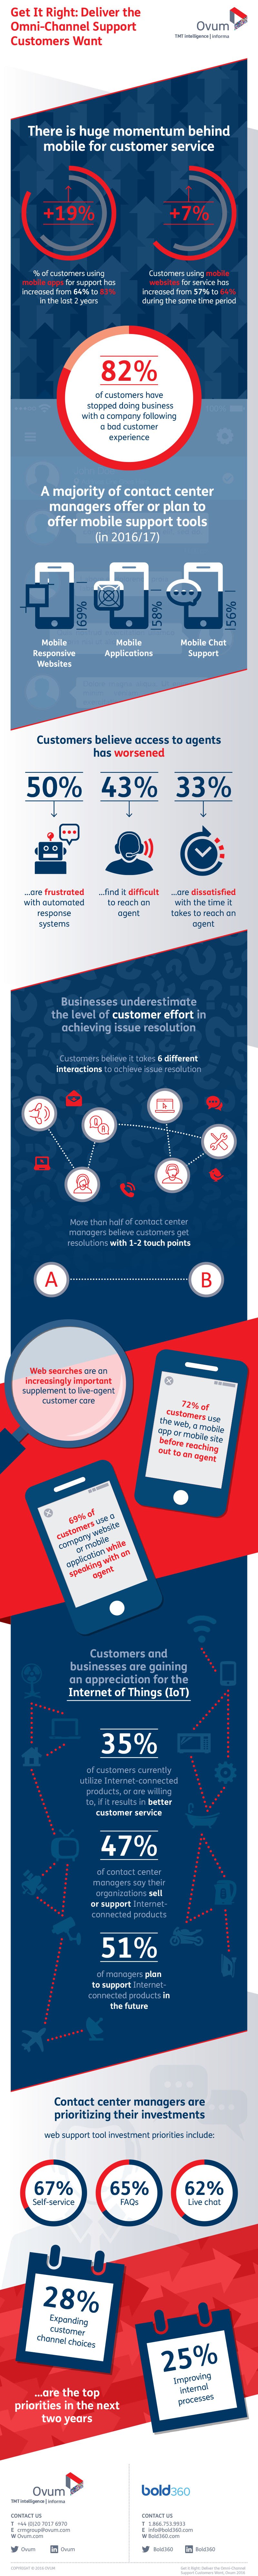 omni-channel-support-infographic